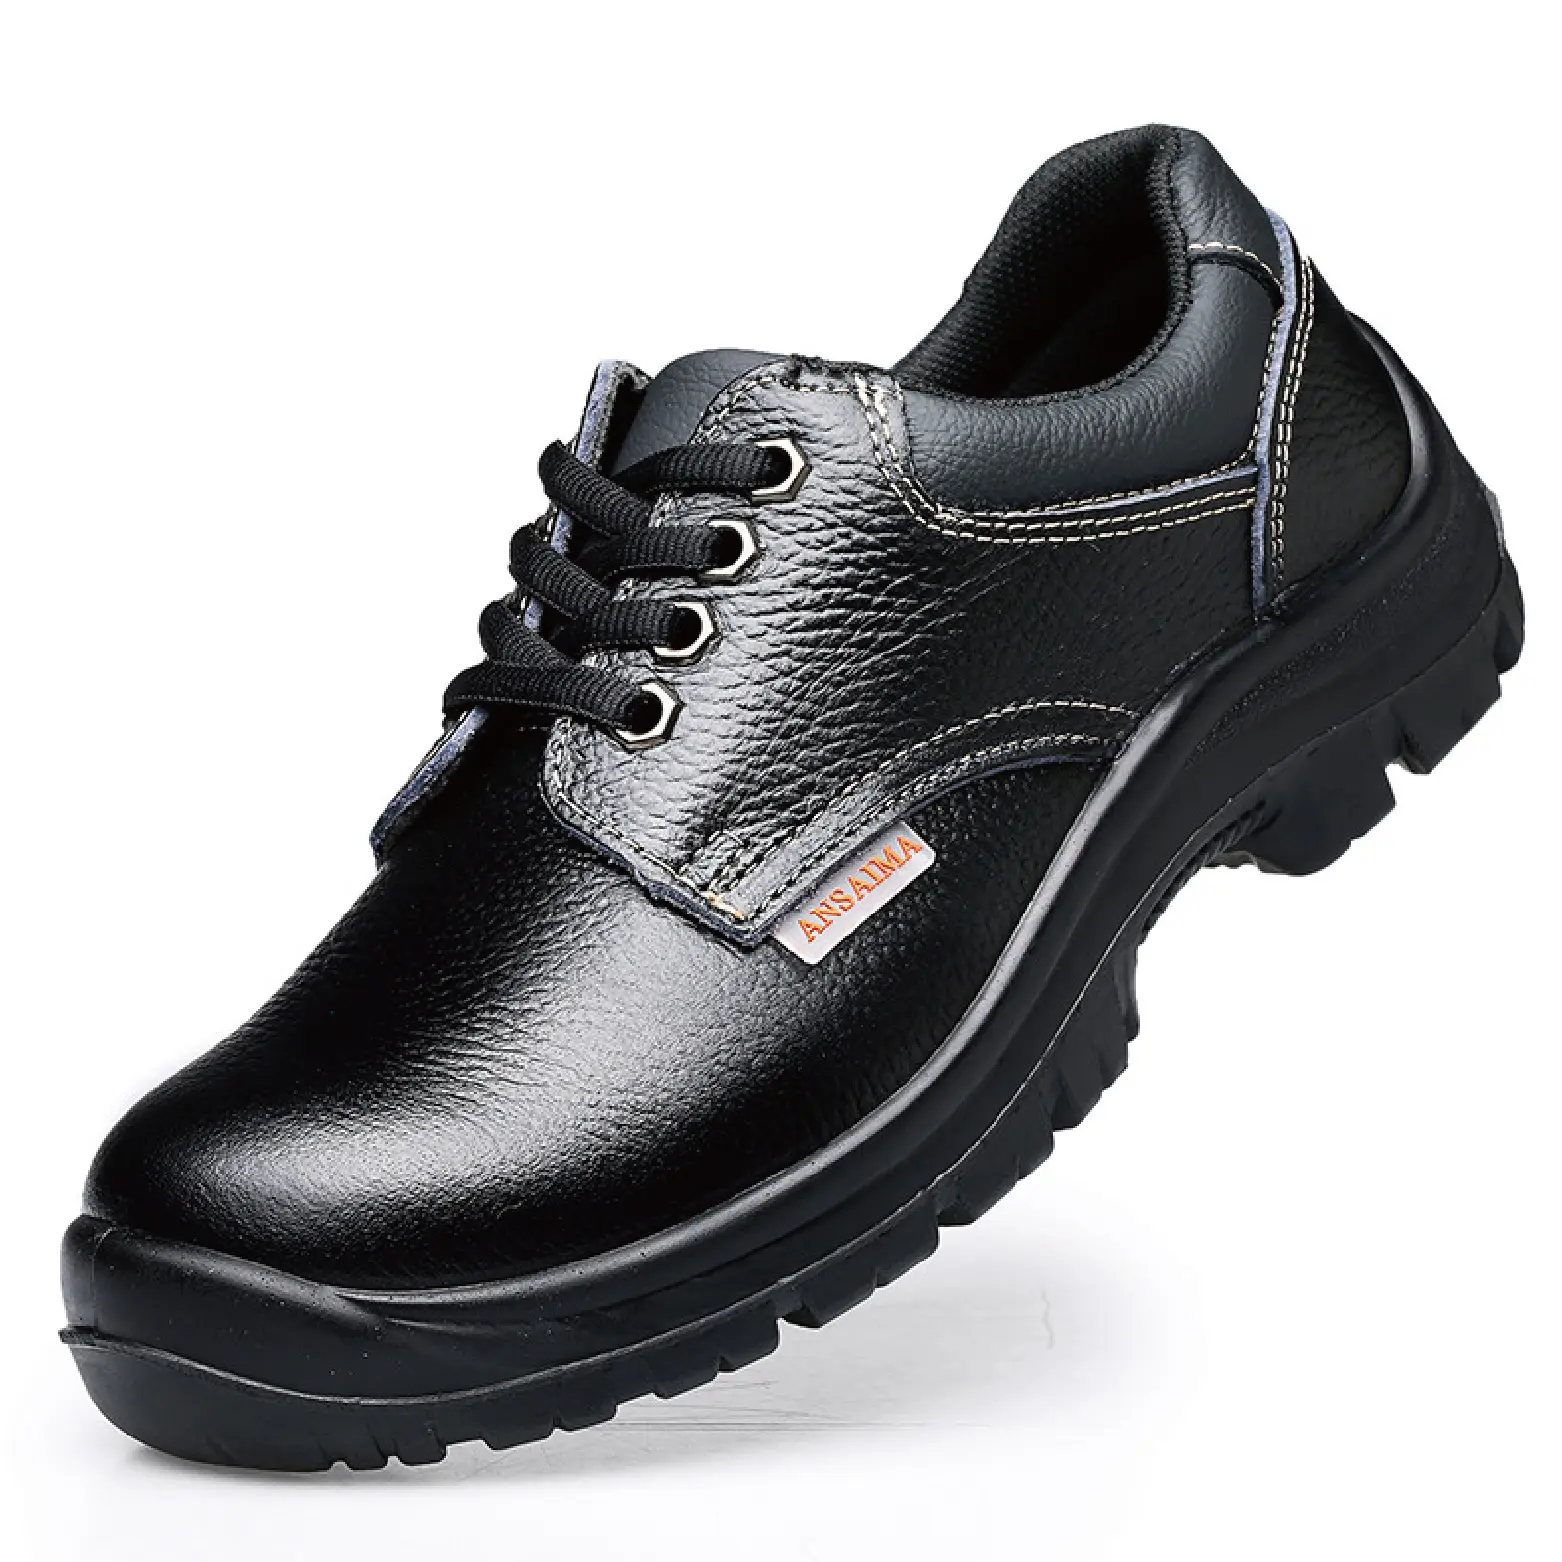 Wholesale Men Work Wear-resistant Smash-resistant Anti-slip Safety Shoes With Steel Toe